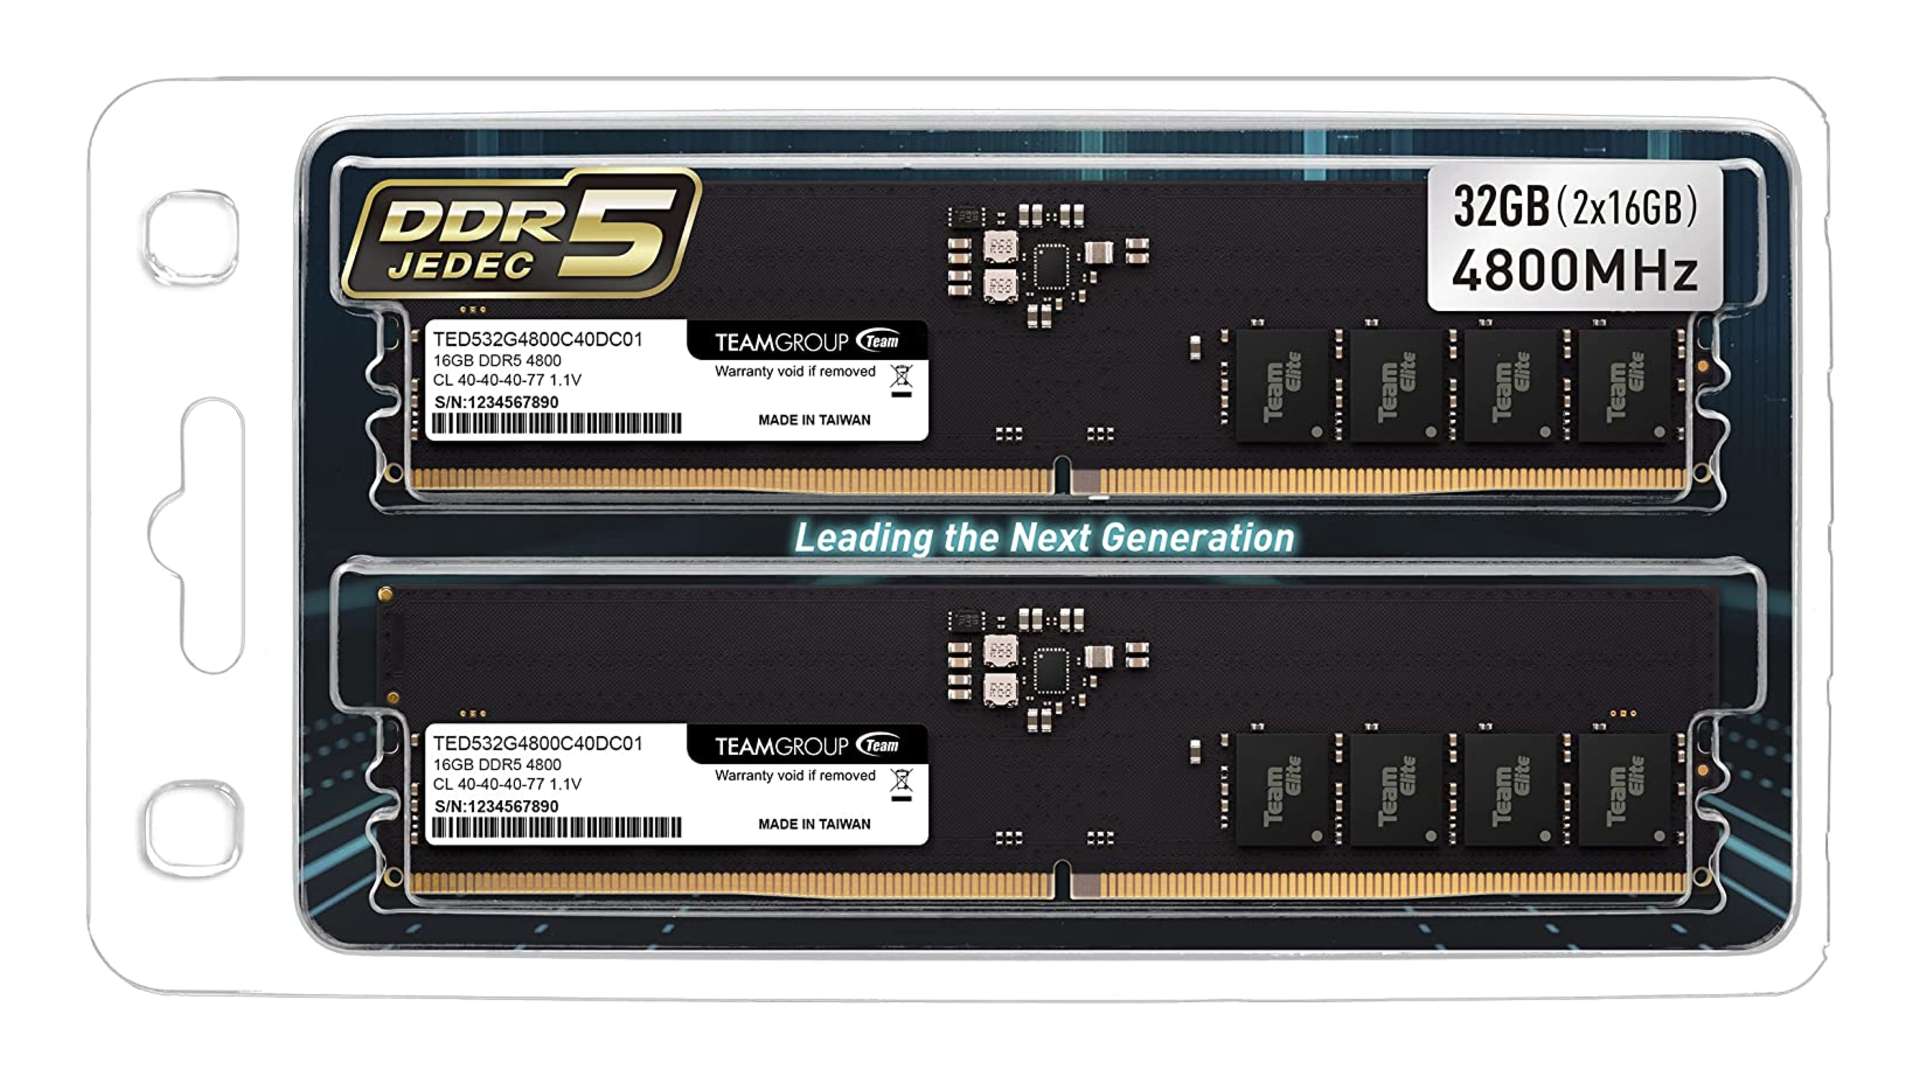 Amazon lists the first set of DDR5 RAM with no motherboard to plug it into